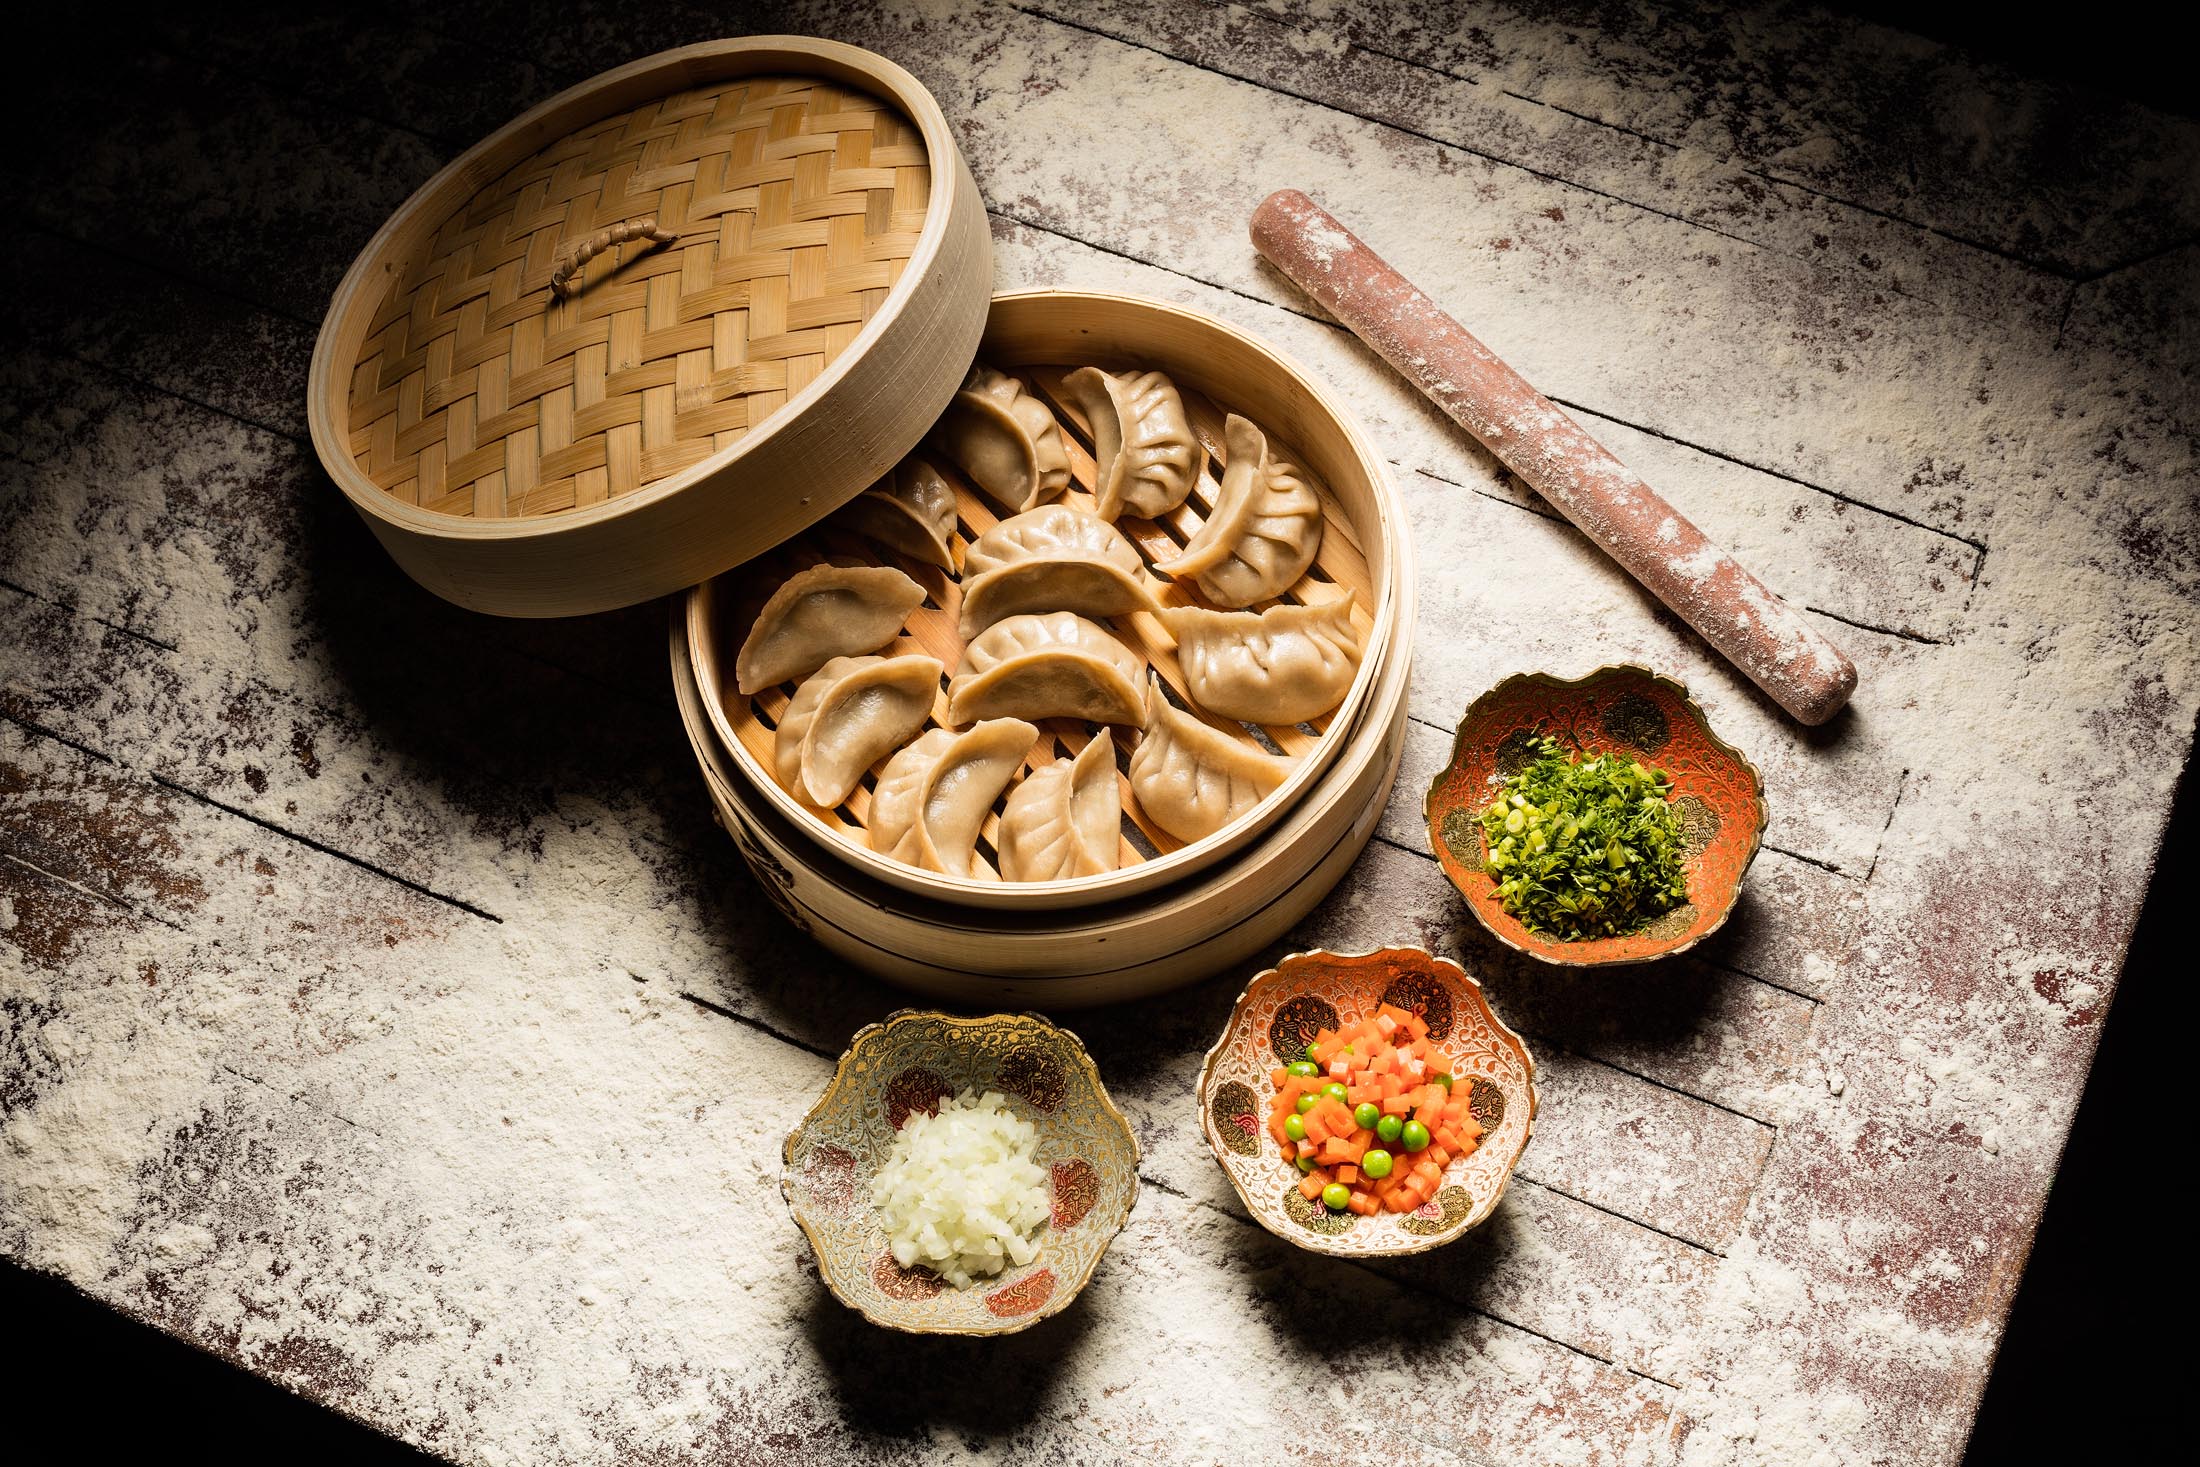 An old table served well as a rustic environment for this dumpling shot. © David Hartung